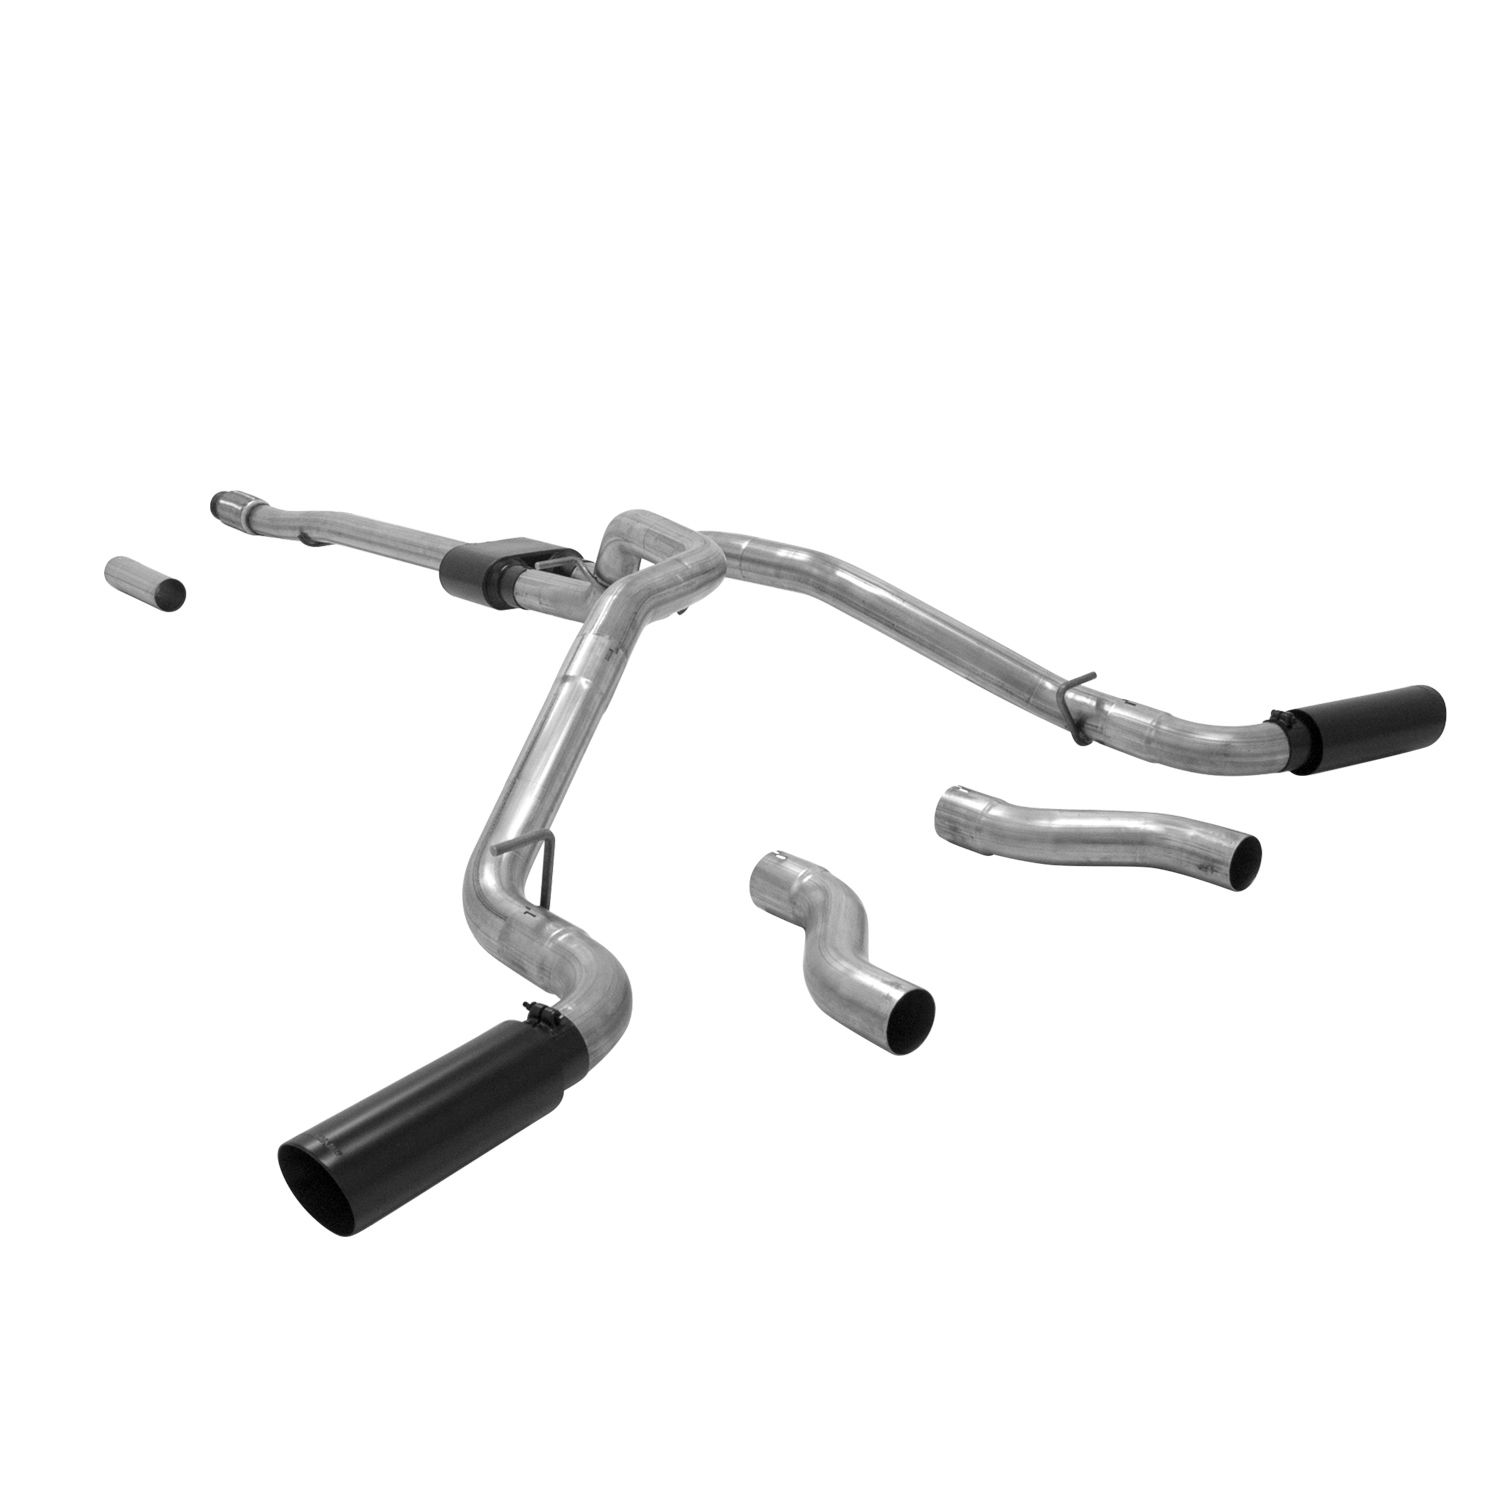 2014 Chevrolet Silverado 1500 5.3L Flowmaster Outlaw Cat-Back Exhaust